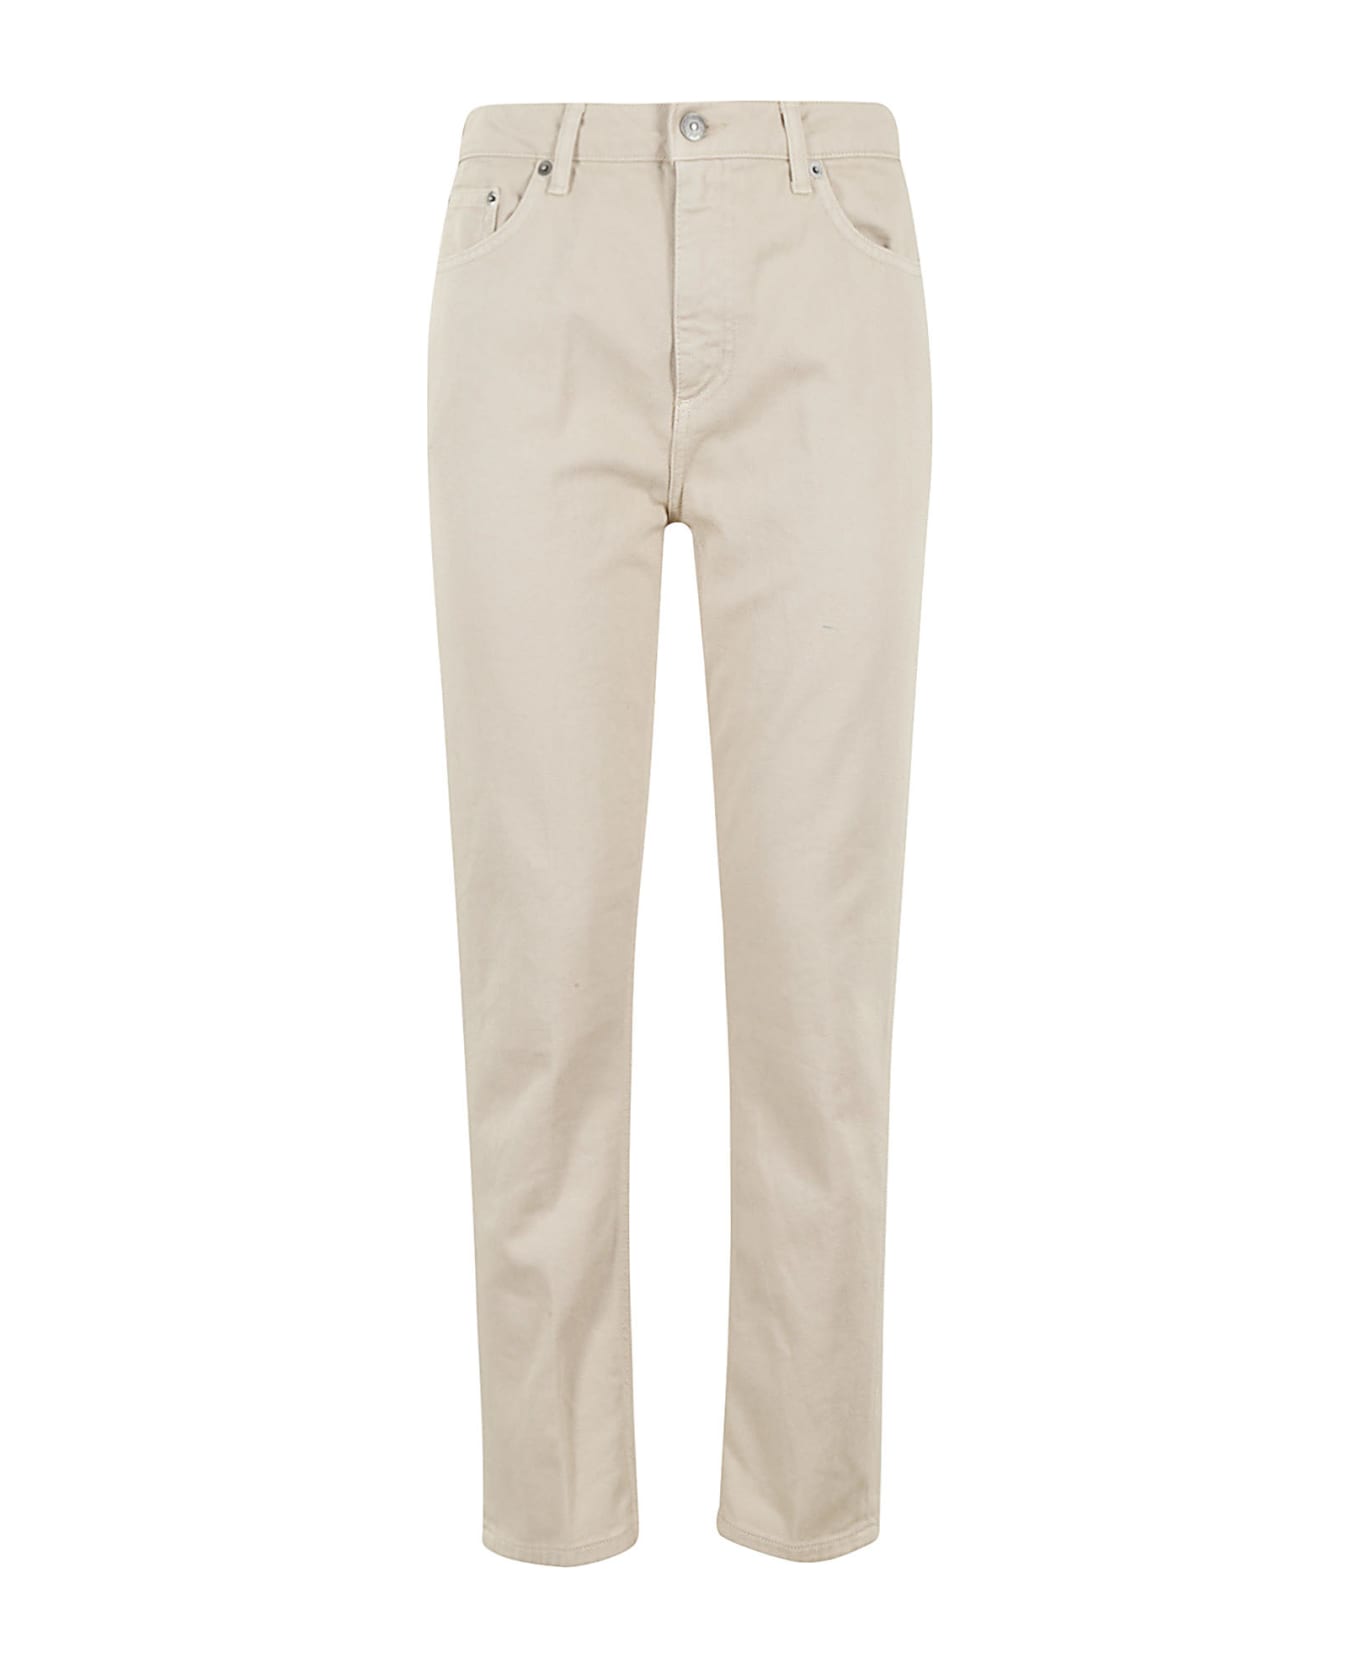 Dondup Pant Cindy - Beige ボトムス